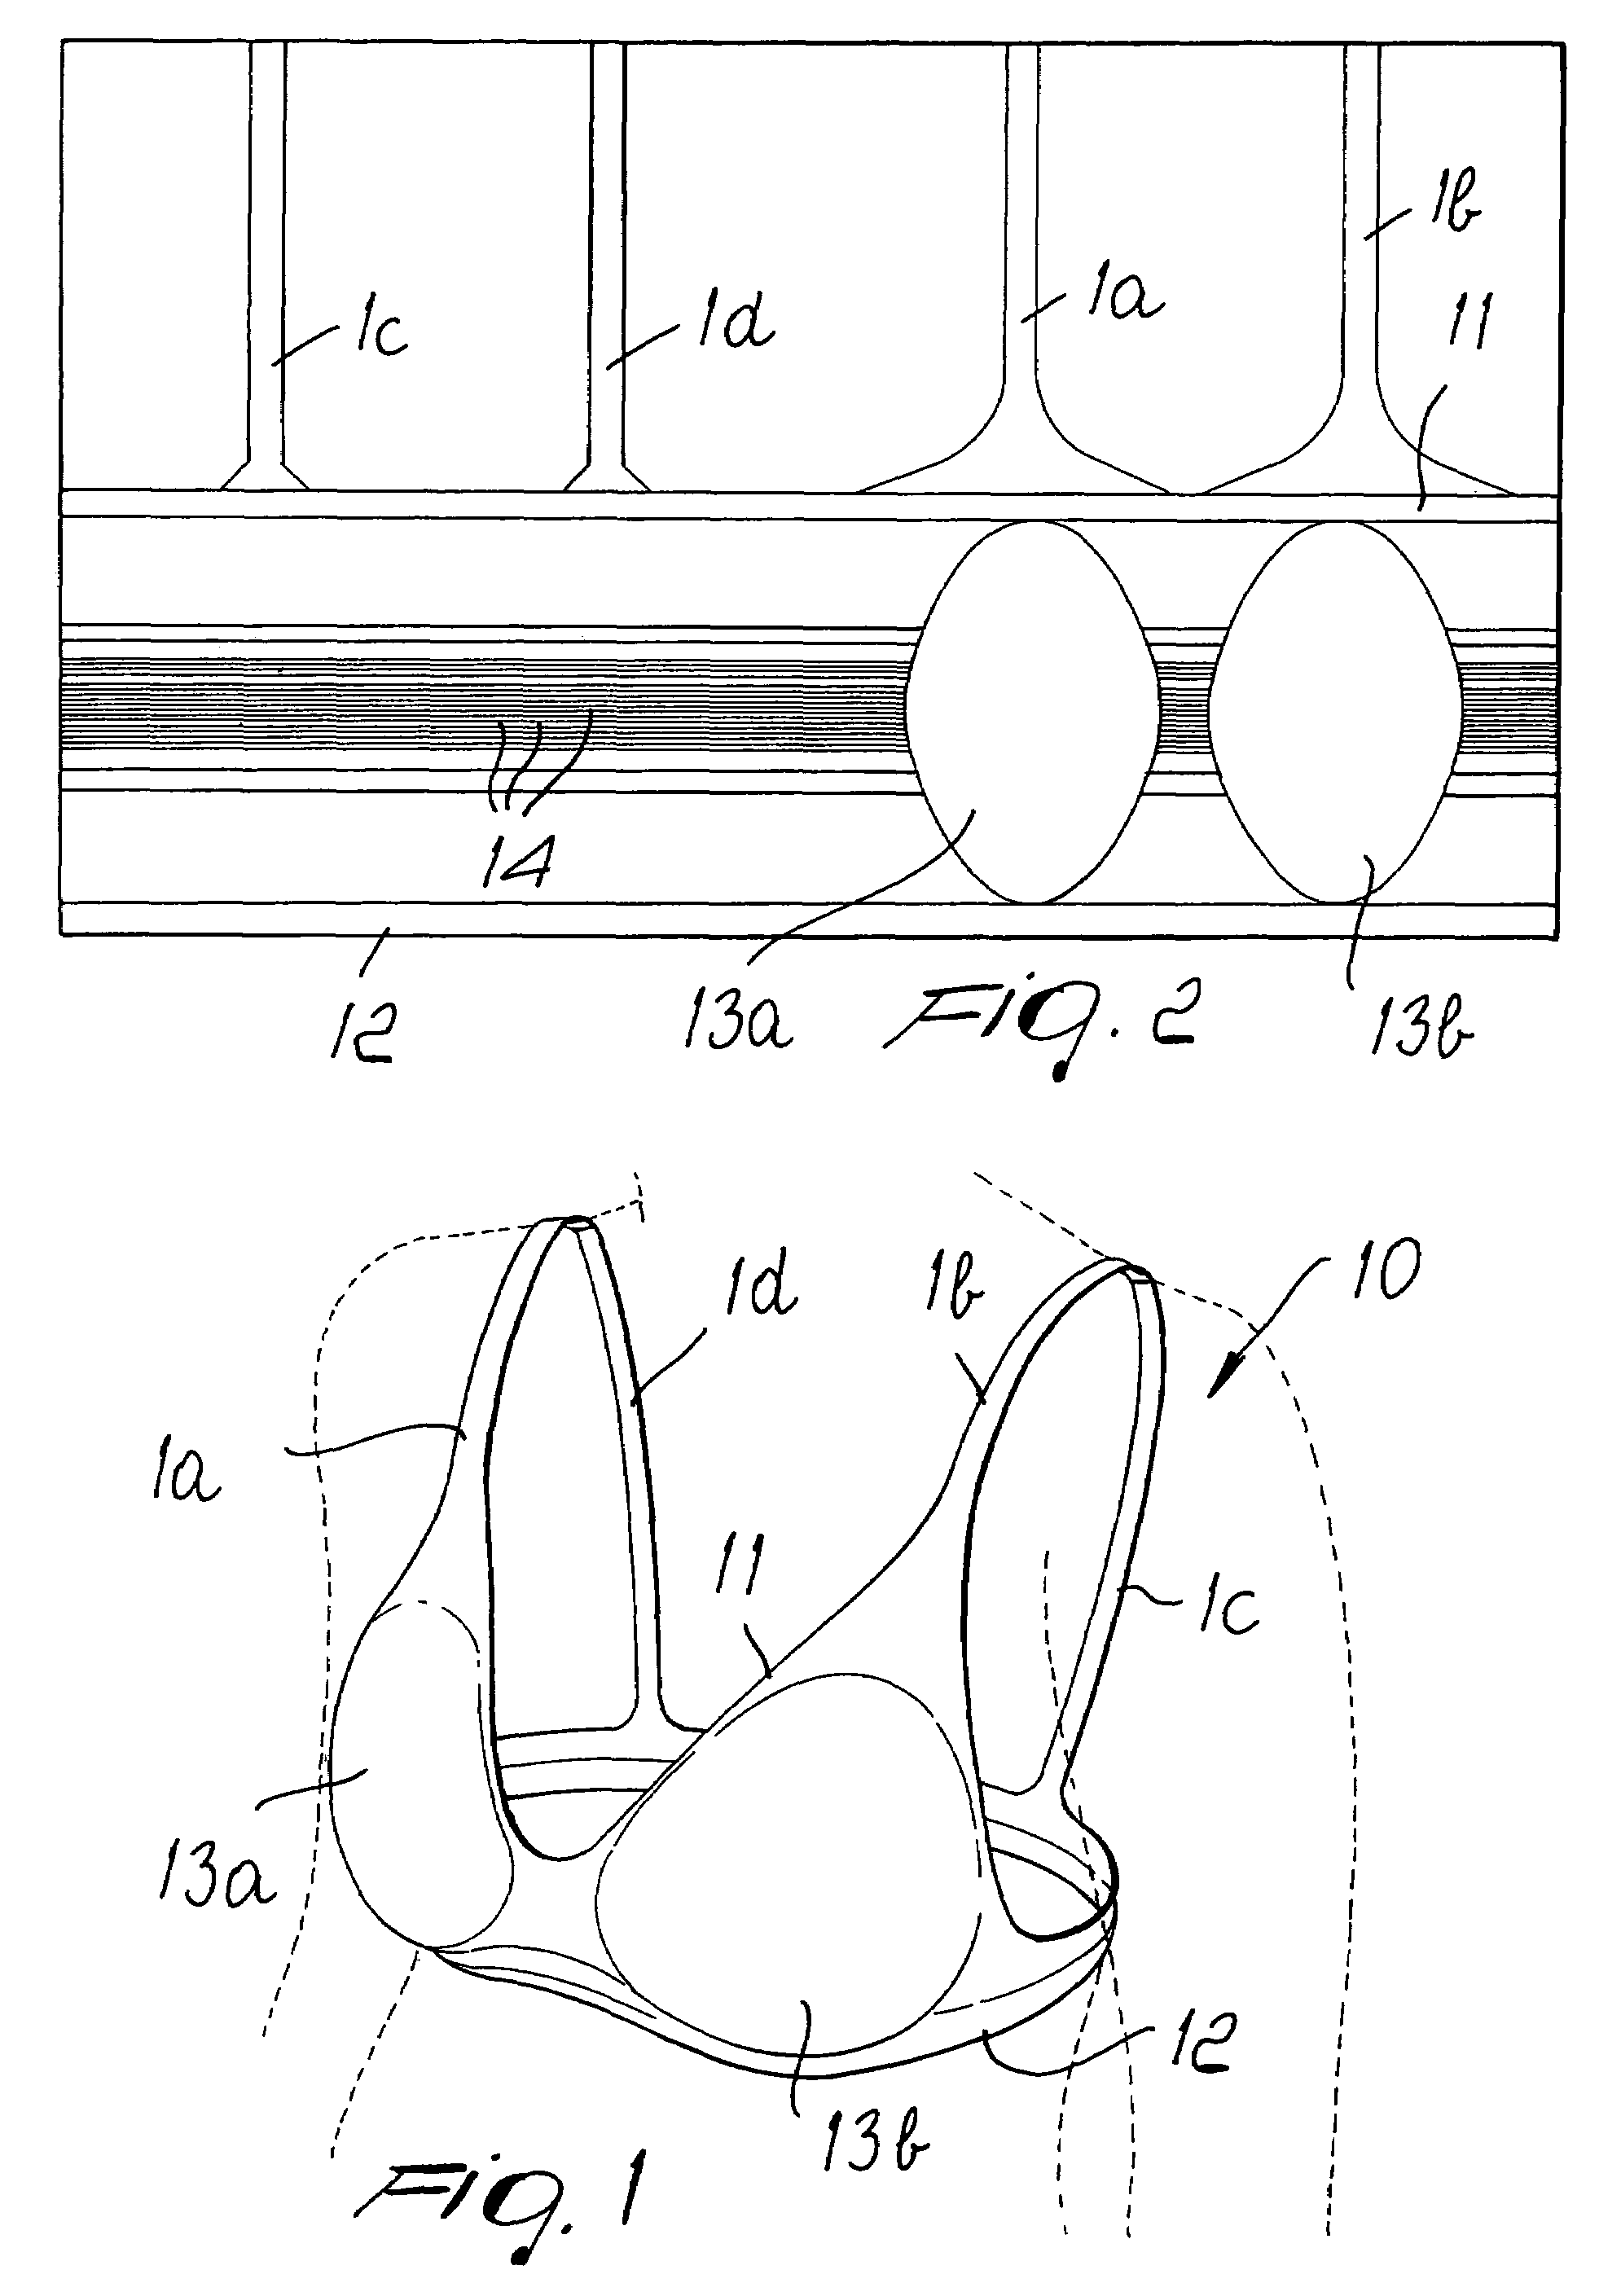 Method for manufacturing knitted articles for forming items of clothing, such as body suits, sleeveless tops, undershirts, bras, underpants or the like, without lateral seams, with a circular knitting machine